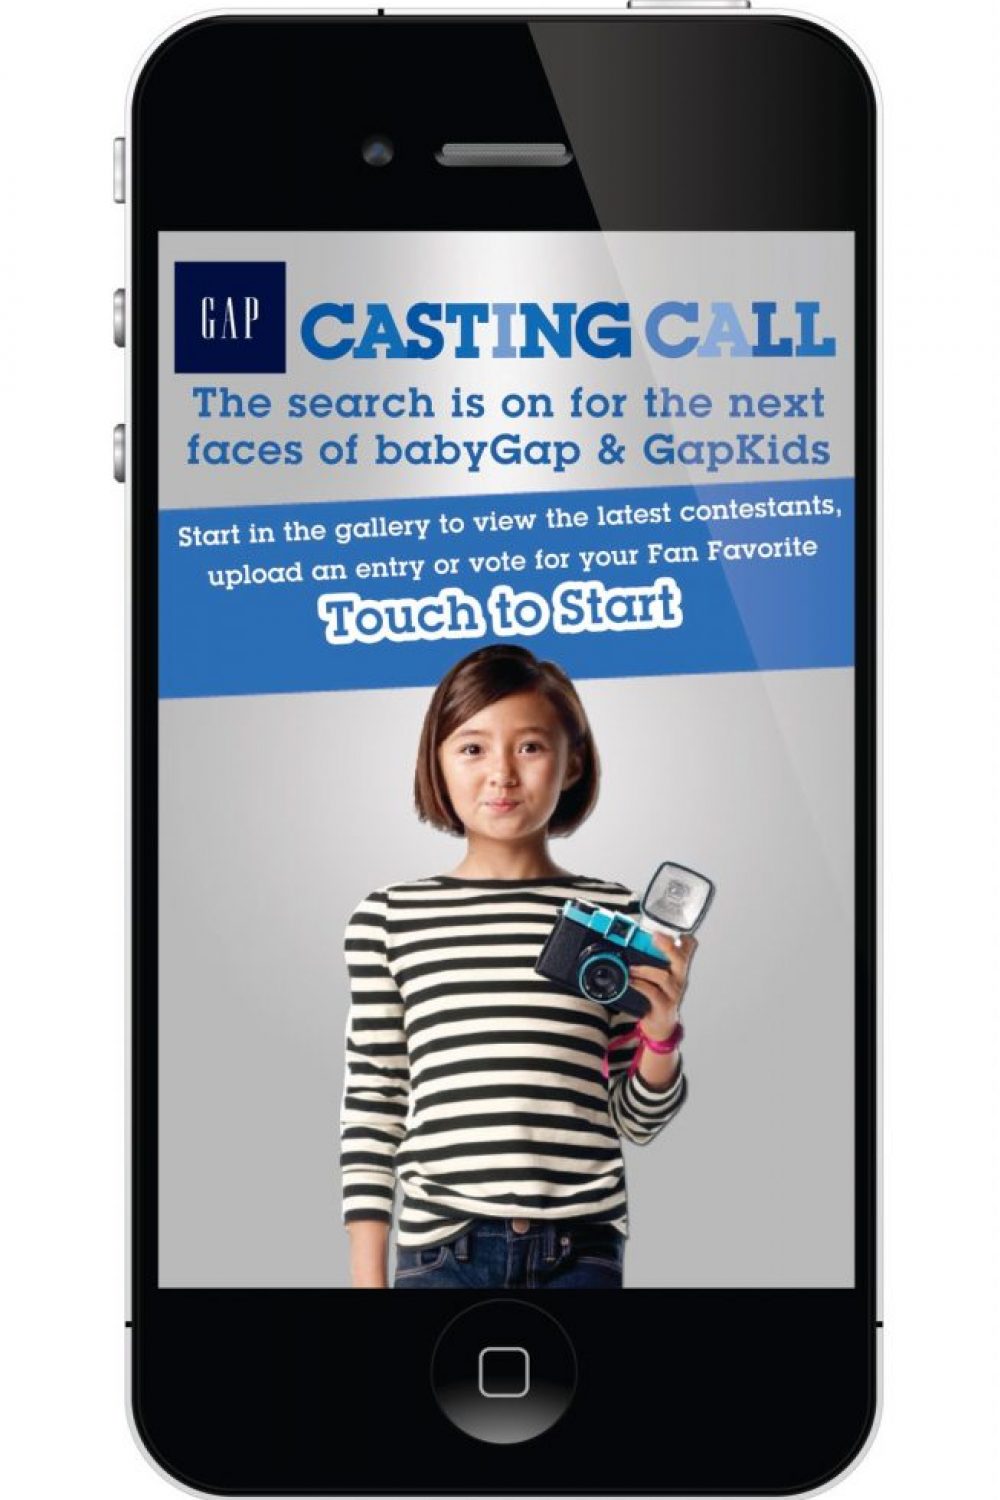 Whiny Wednesday: Enter Gap’s 5th-Annual Casting Call!